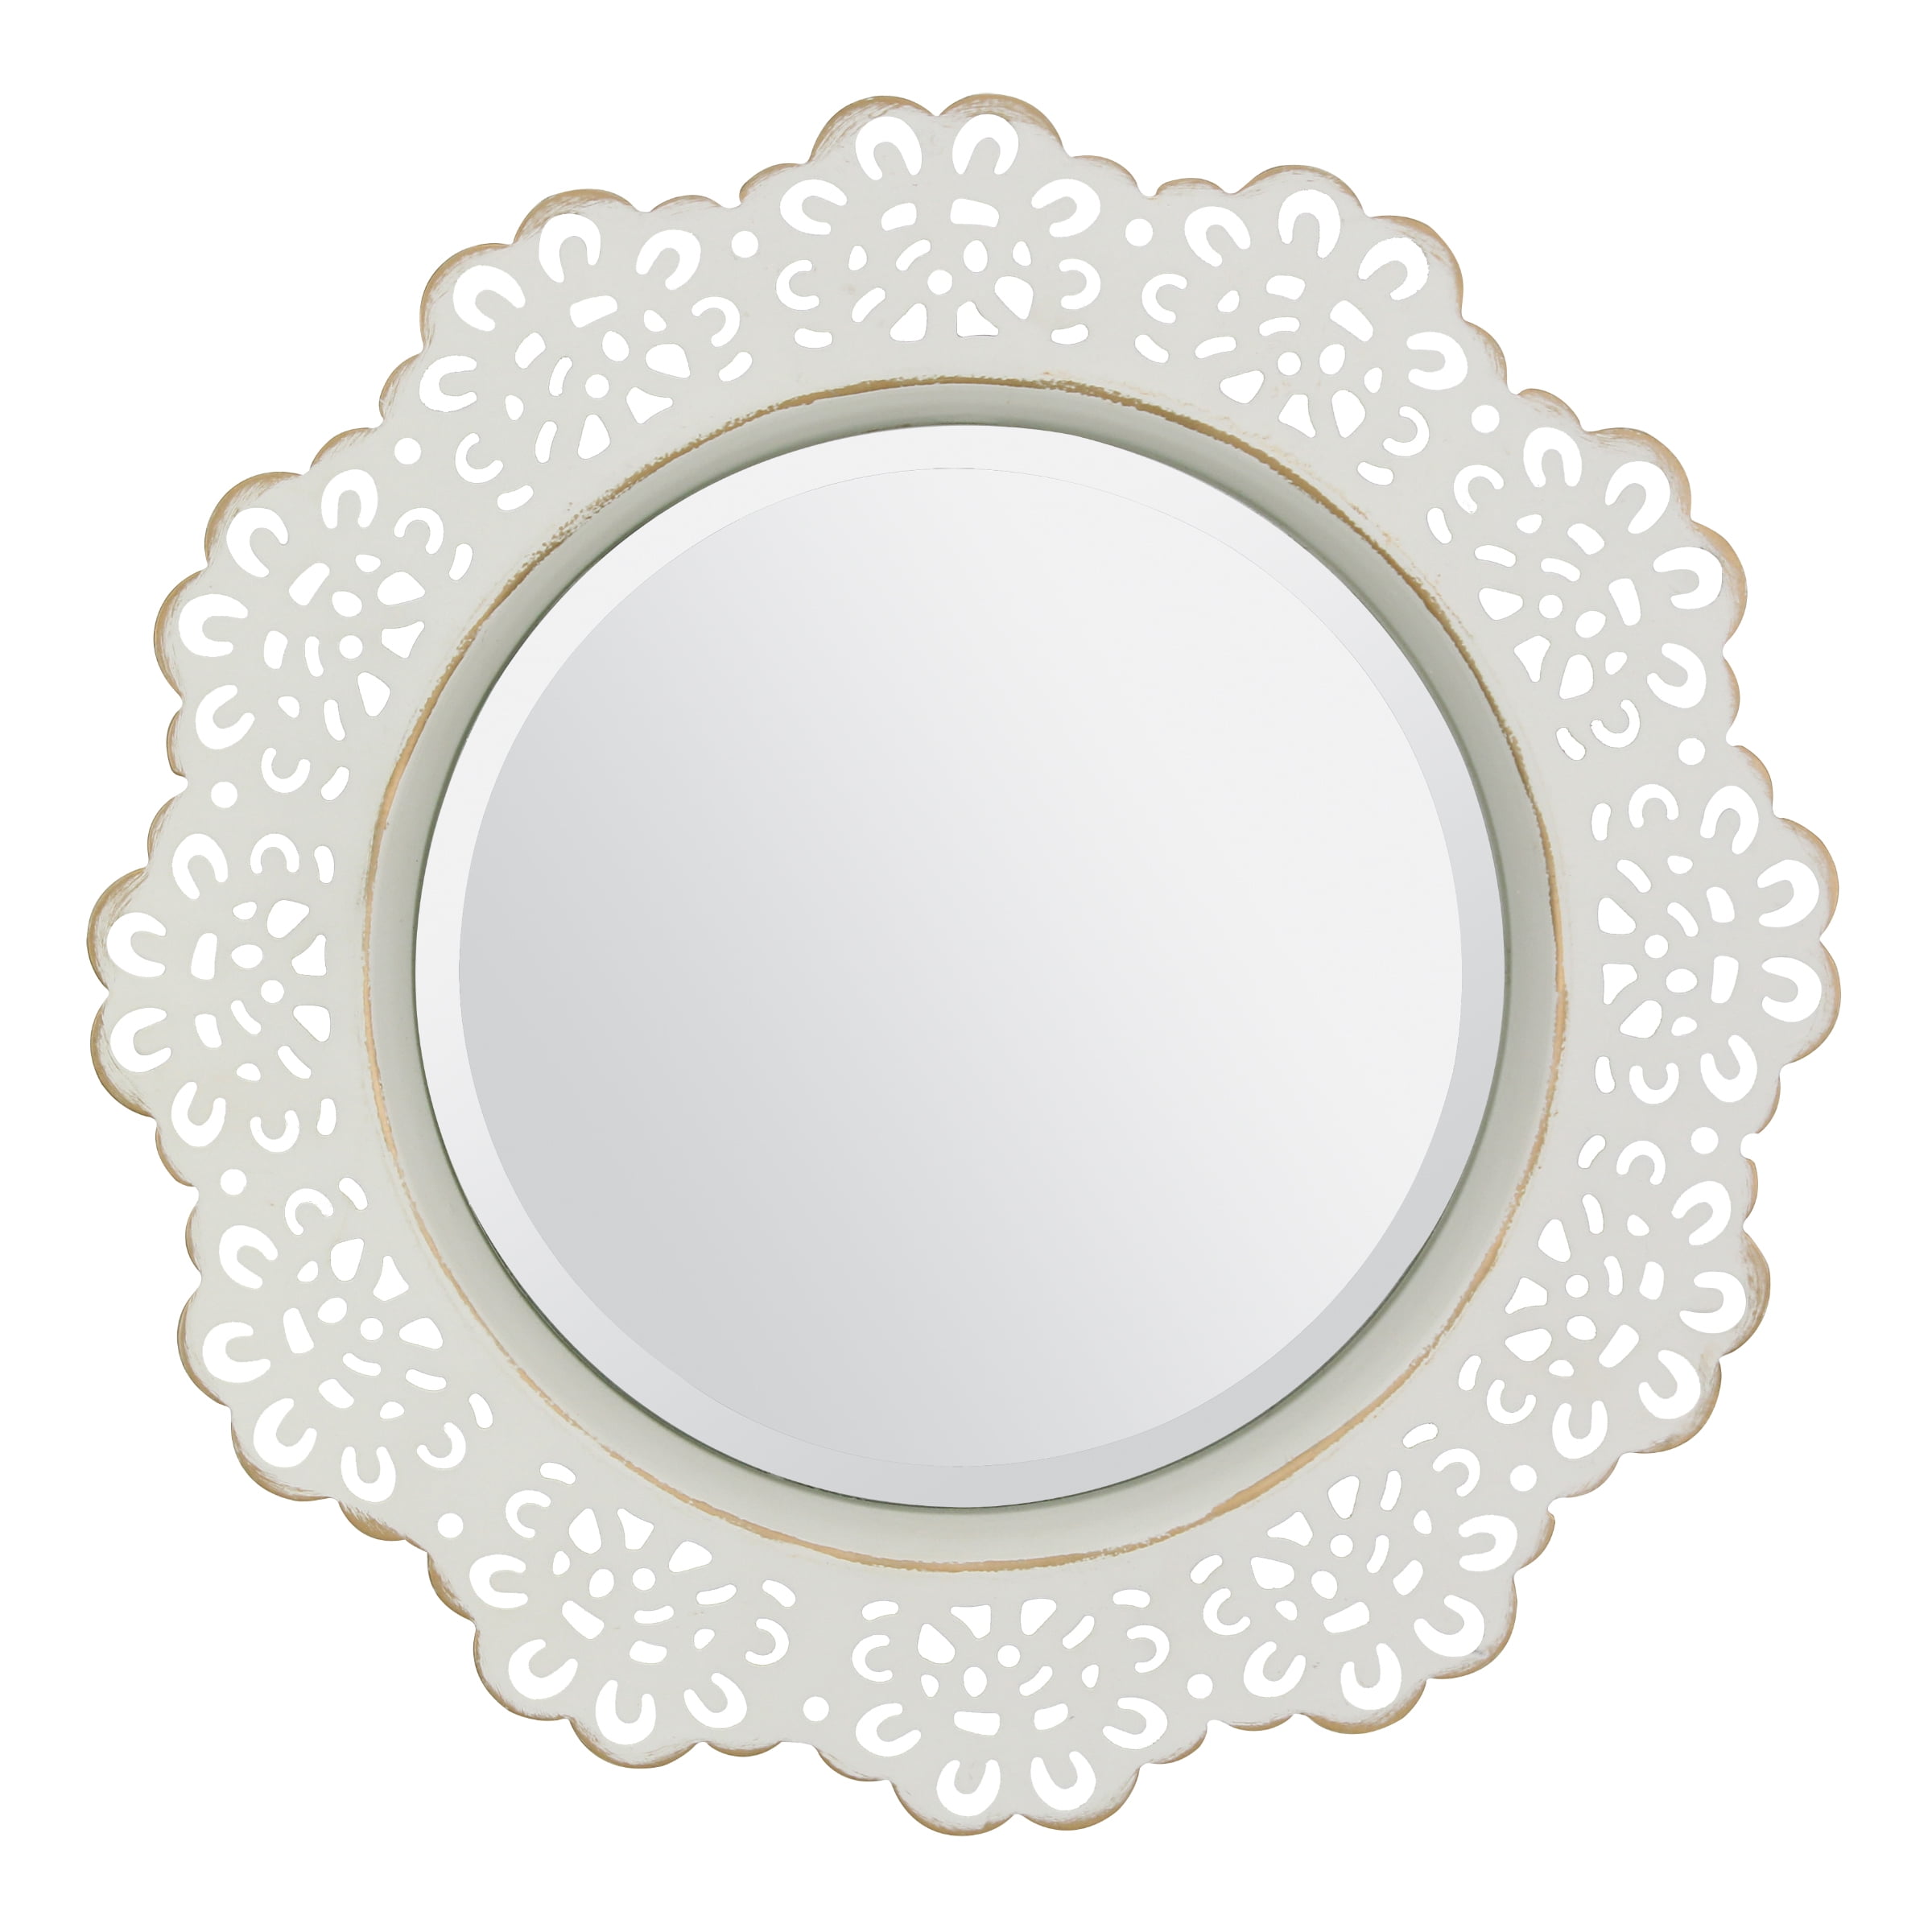 Vintage French Round Bevelled Carved Wall Mounted Mirror White Wash Frame 